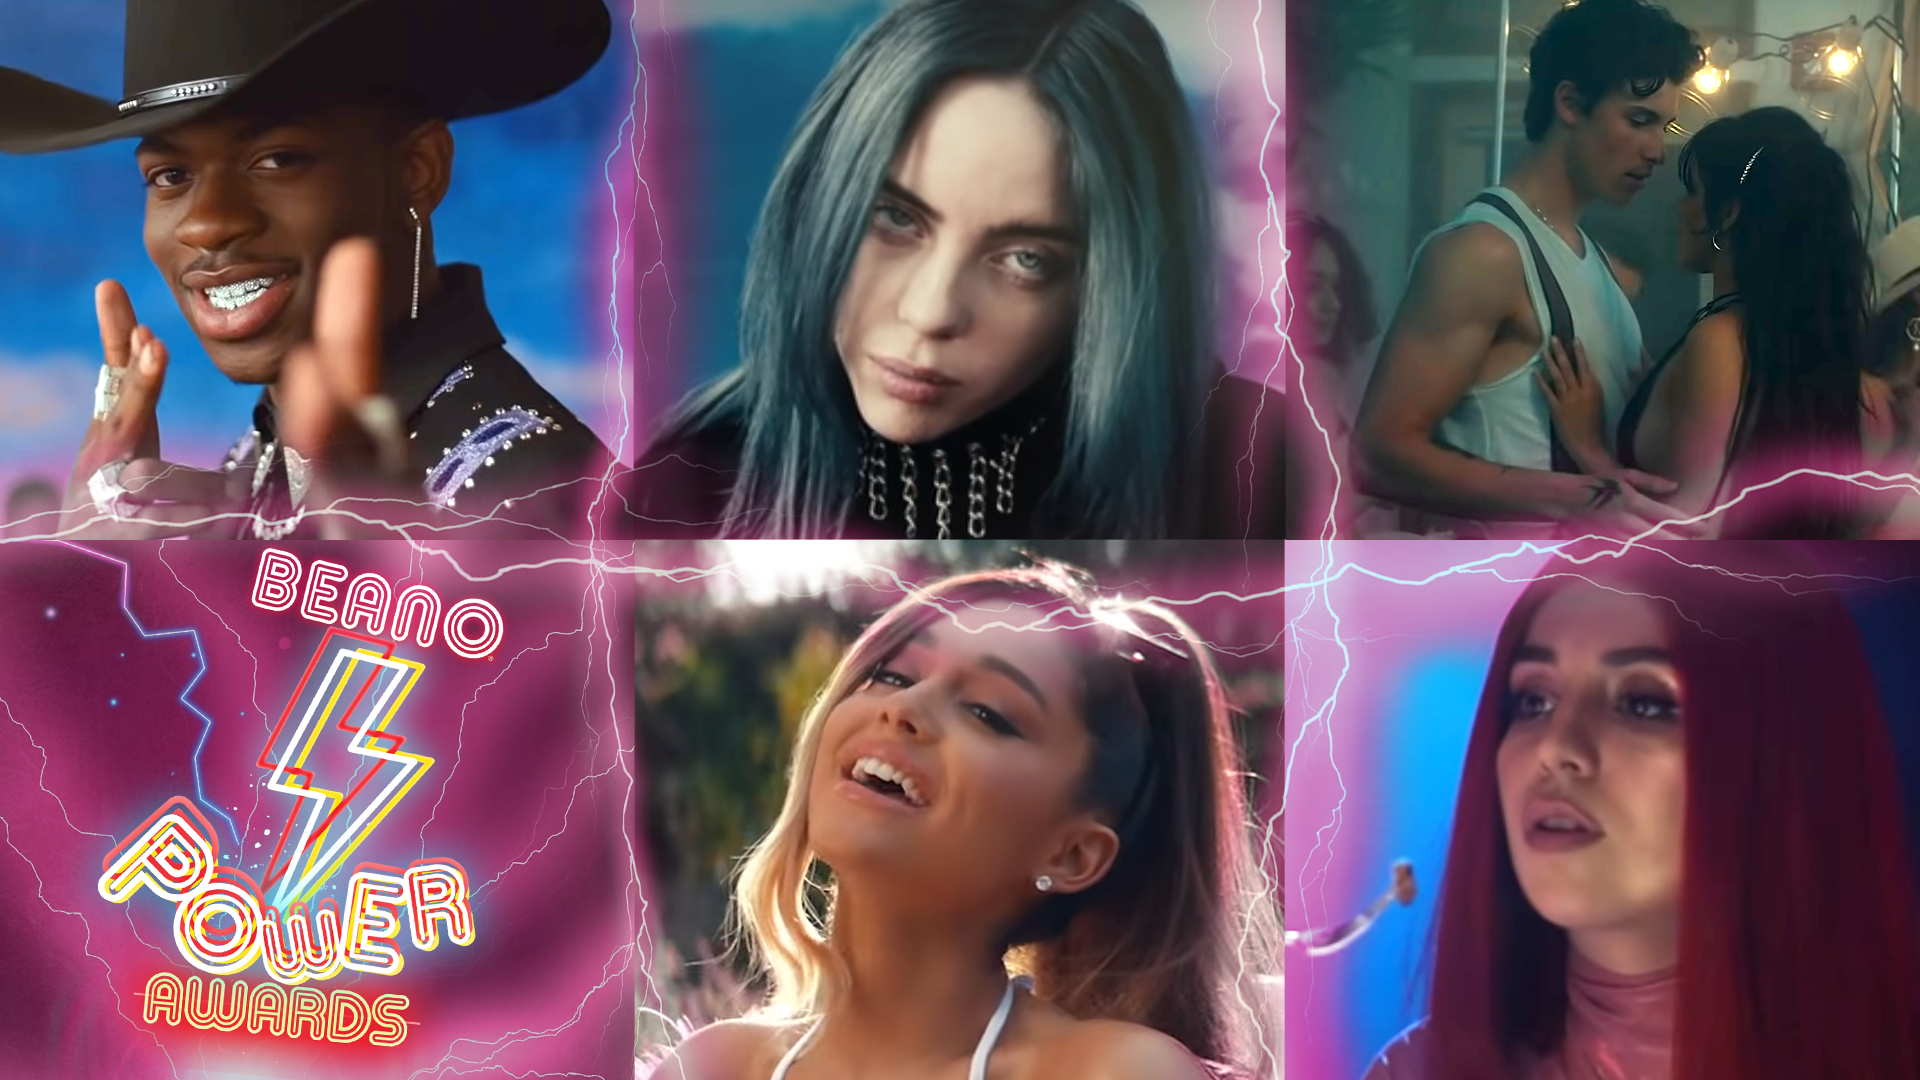 From top left to top right: Lil Nas X, Billie Eilish, Shawn Mendes & Camilla Cabeo. From bottom left to bottom right: Beano Power Awards logo, Ariana Grande, Ava Max